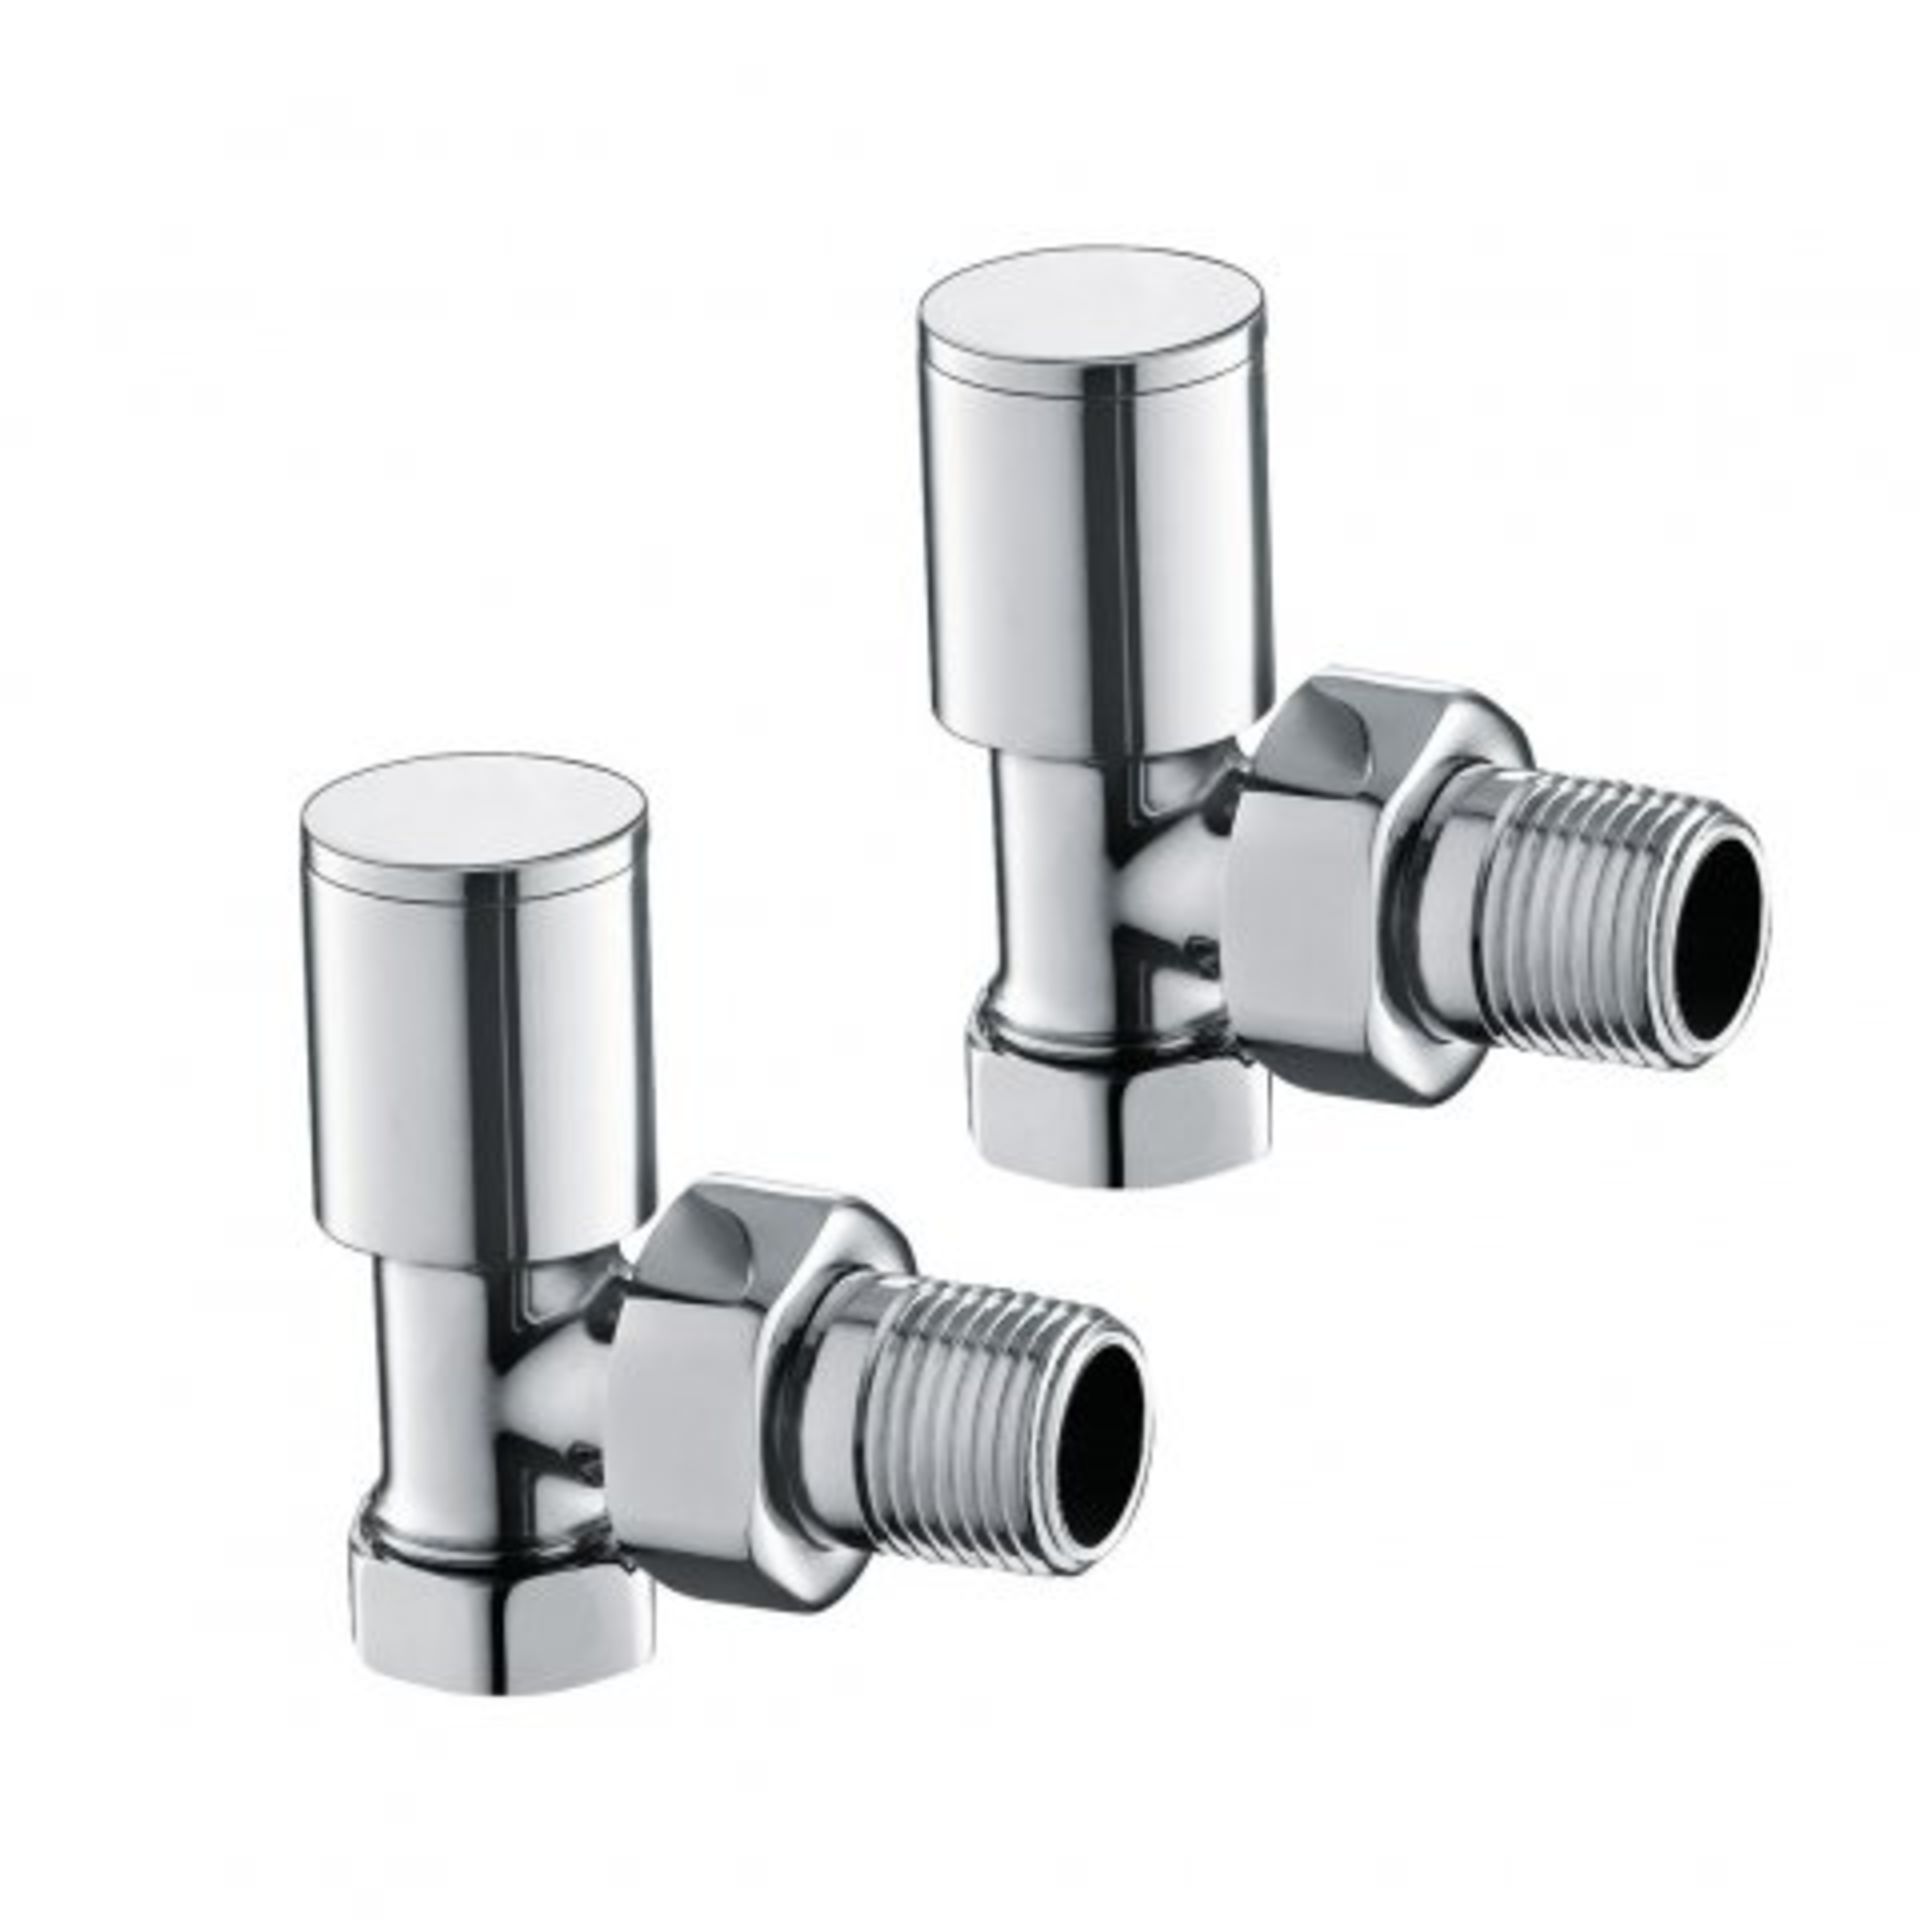 (M98) 15mm Standard Connection Angled Radiator Valves - Heavy Duty Polished Chrome Plated Brass Made